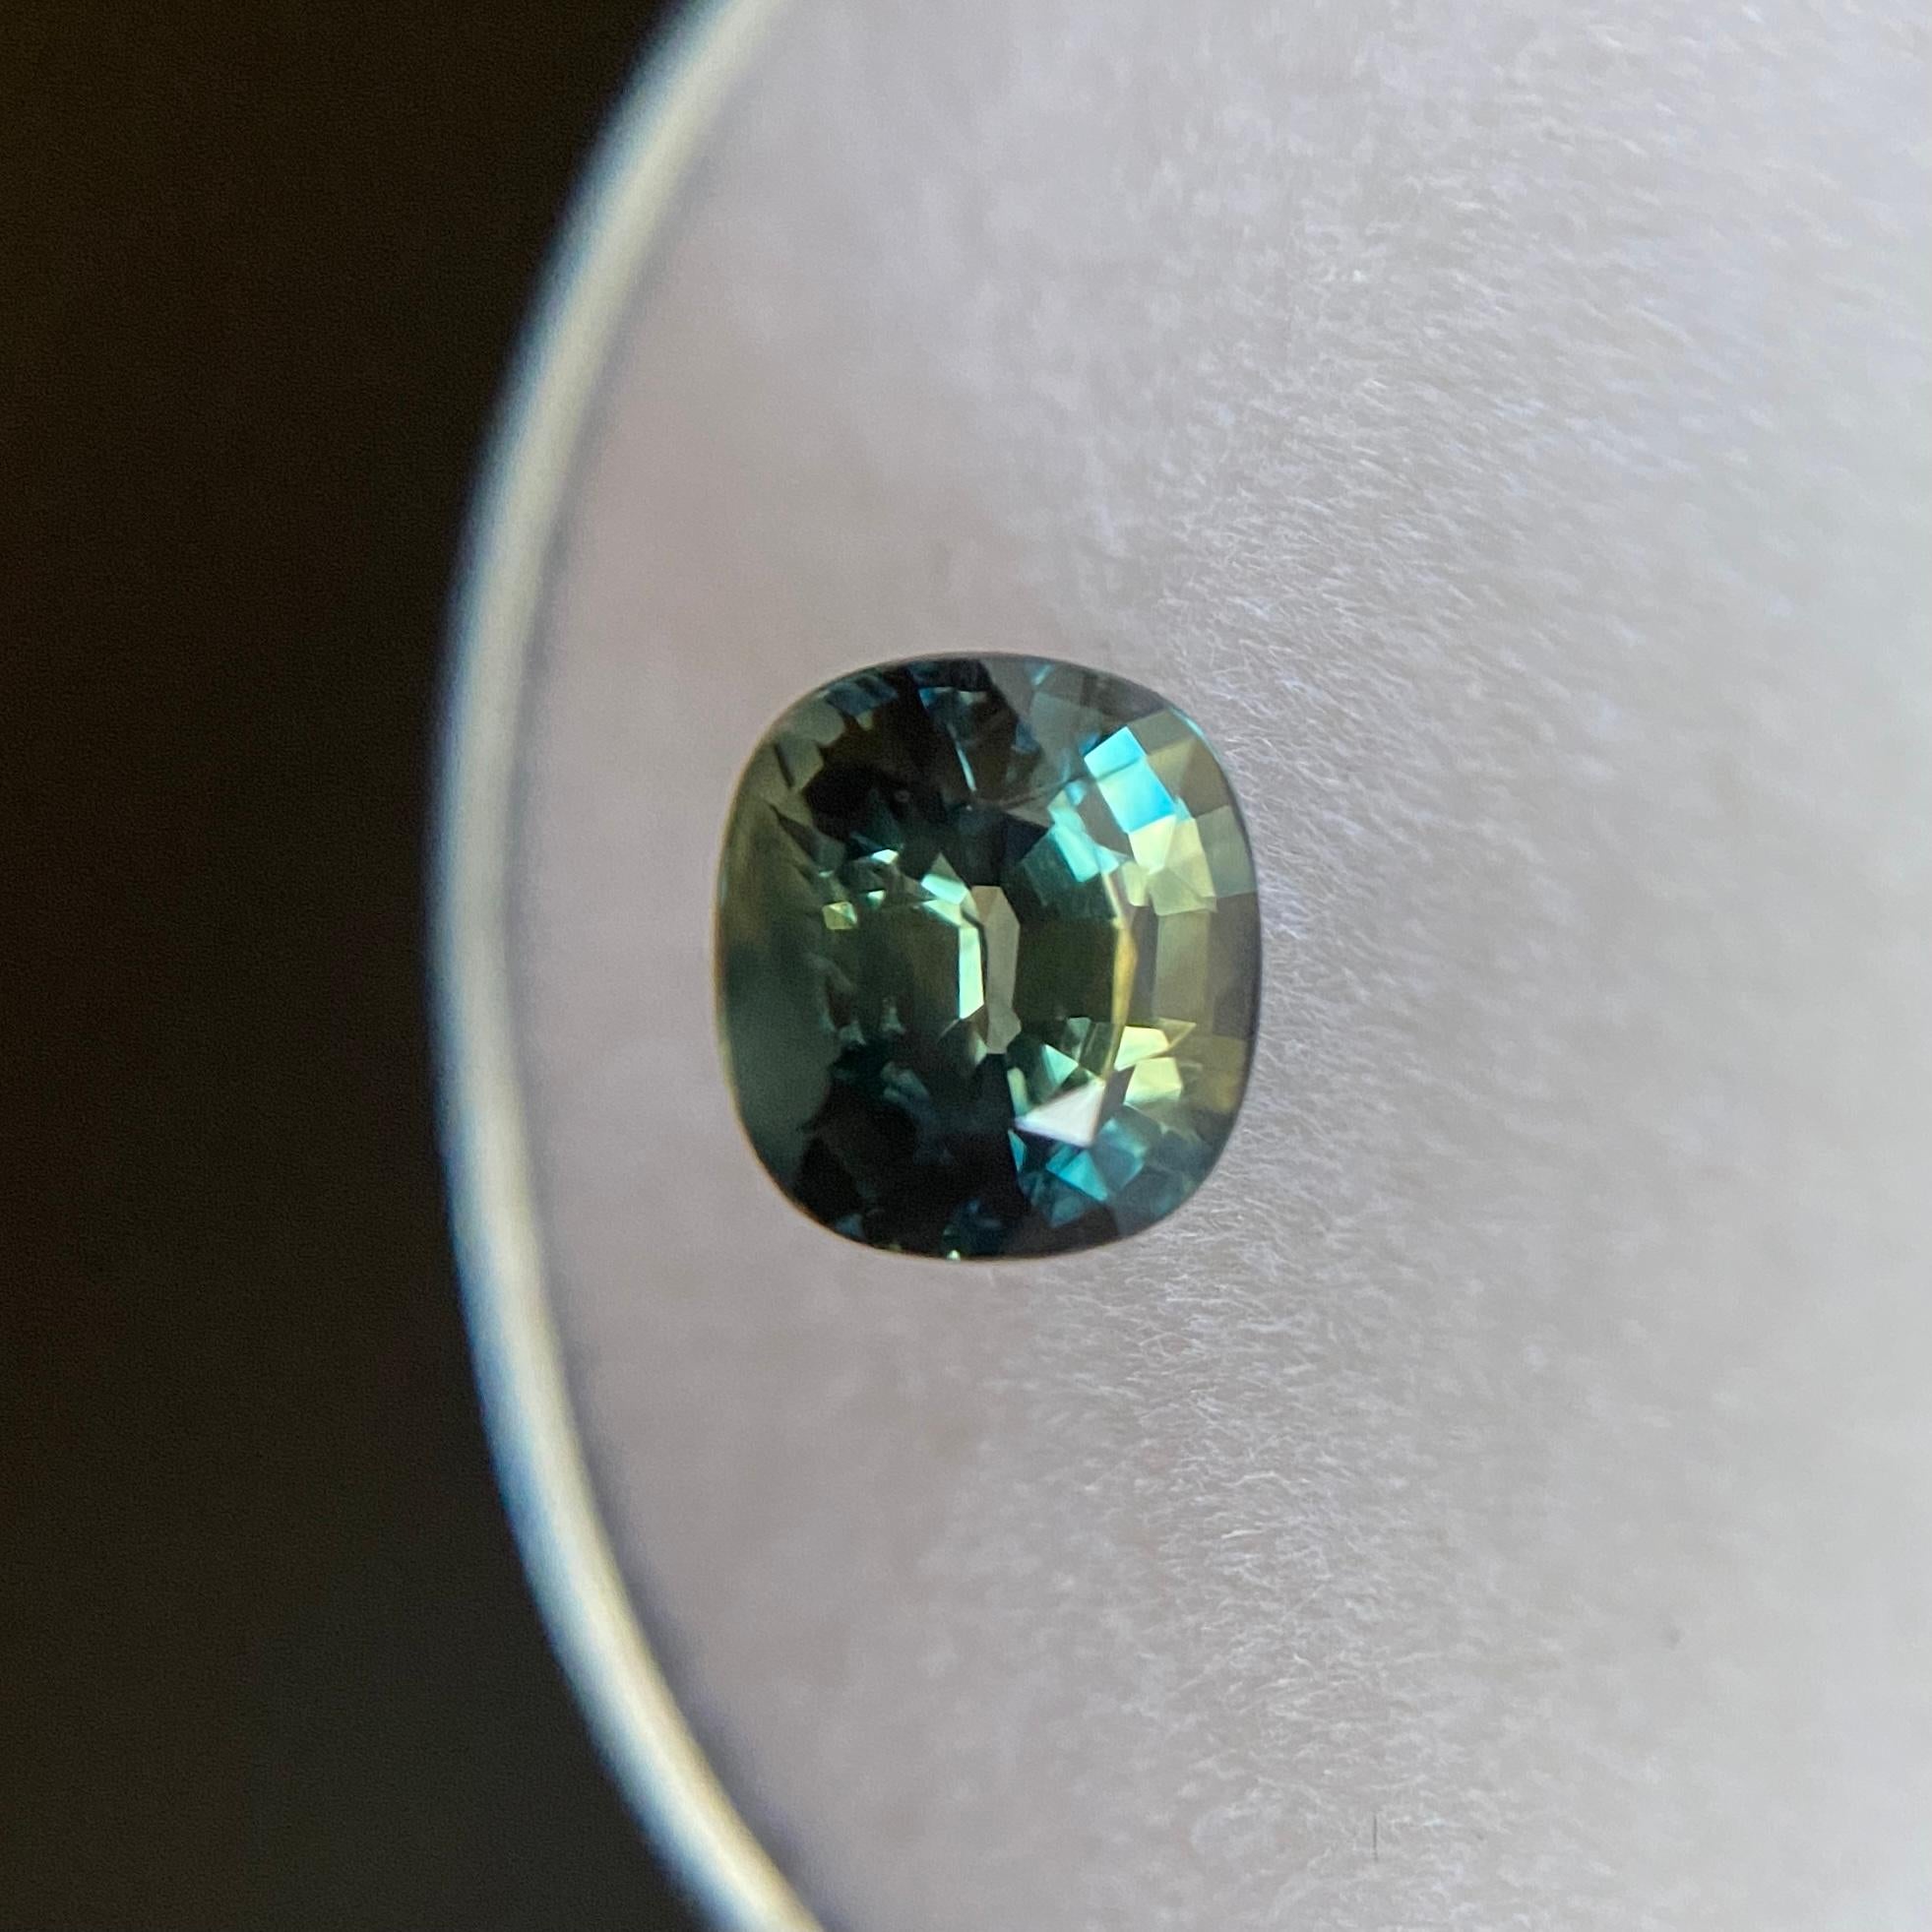 Fine Natural Green Blue Bi Colour Australian Sapphire Gem.

1.42 Carat with a beautiful and unique green blue bi-colour effect. Rare and stunning to see. Also has very good clarity, a very clean stone.

The sapphire also has an excellent cushion cut